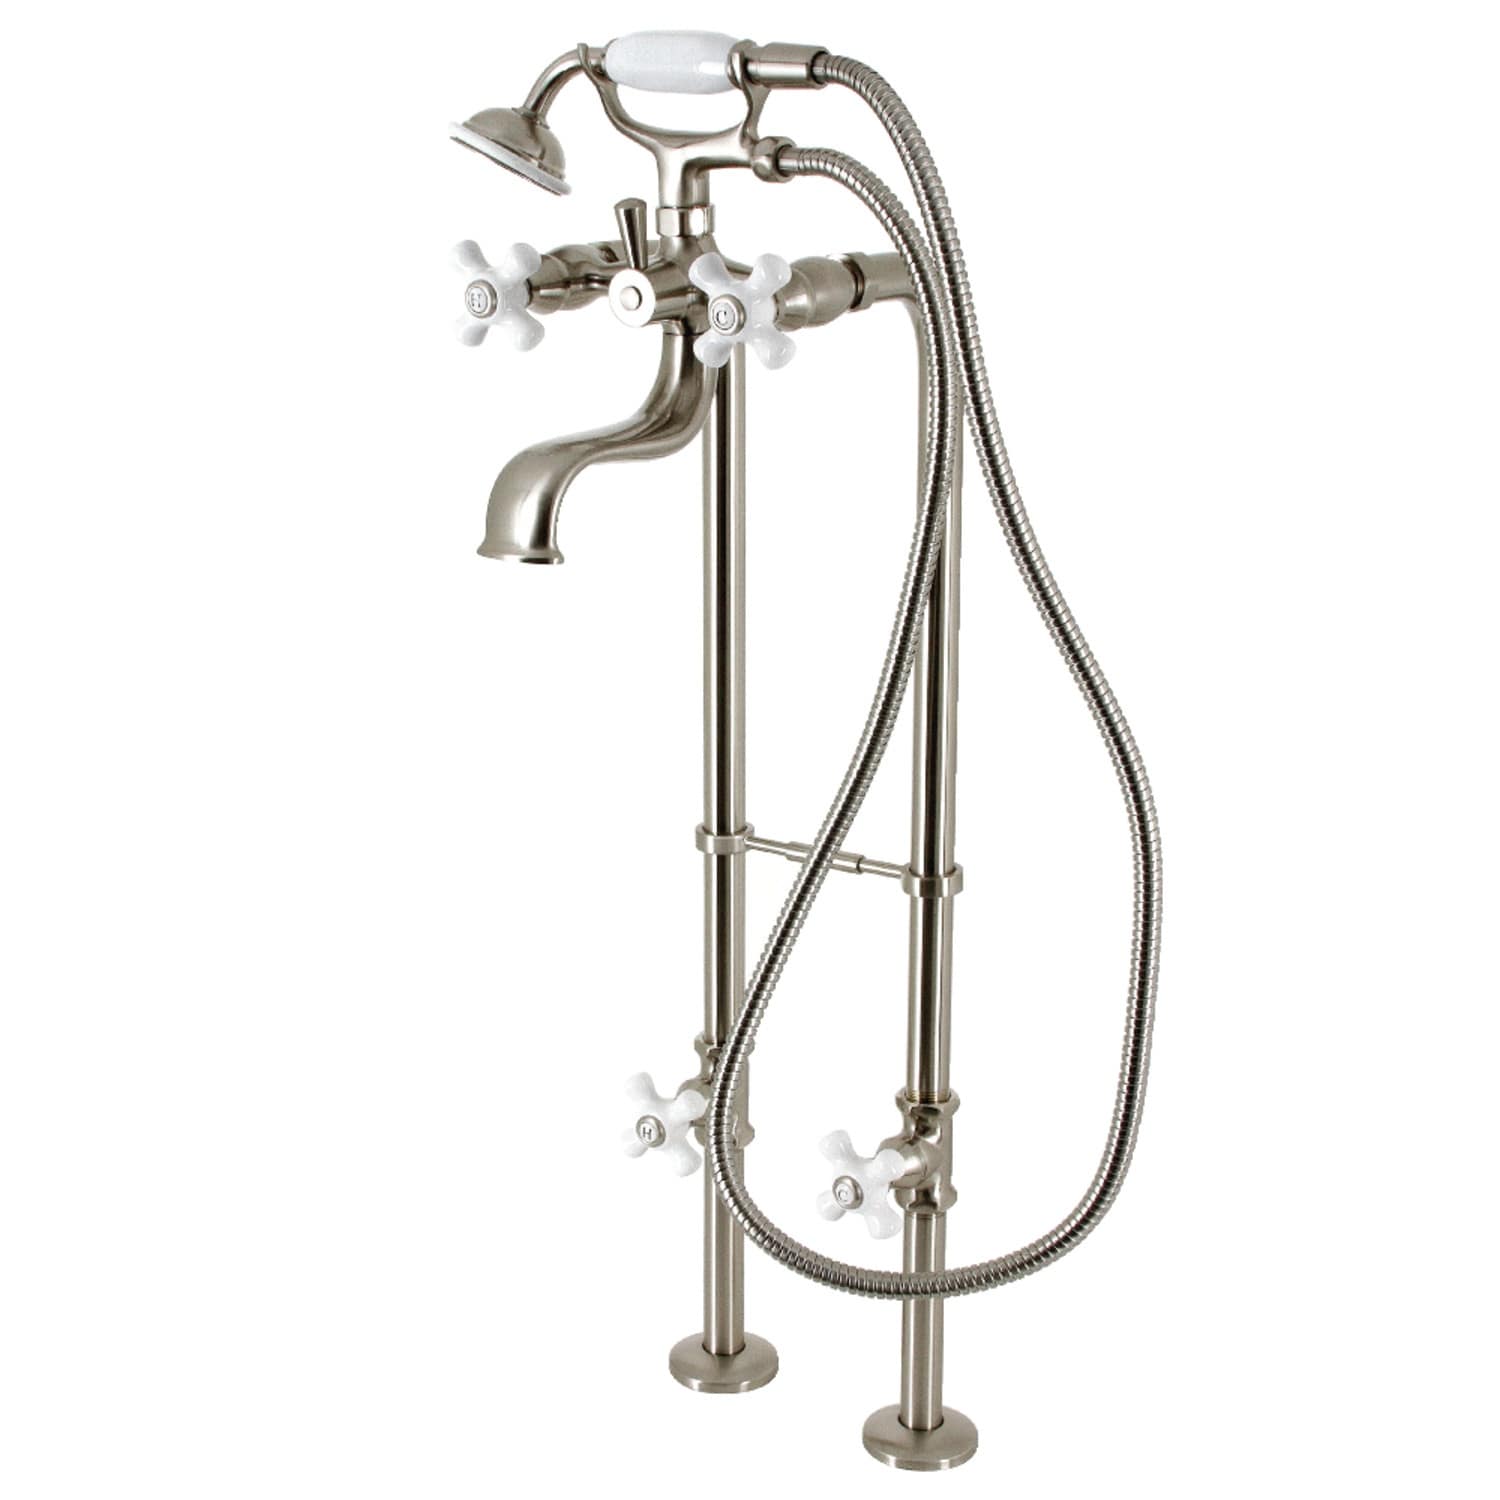 Kingston Brass Freestanding Clawfoot Tub Faucet Package with Supply Line